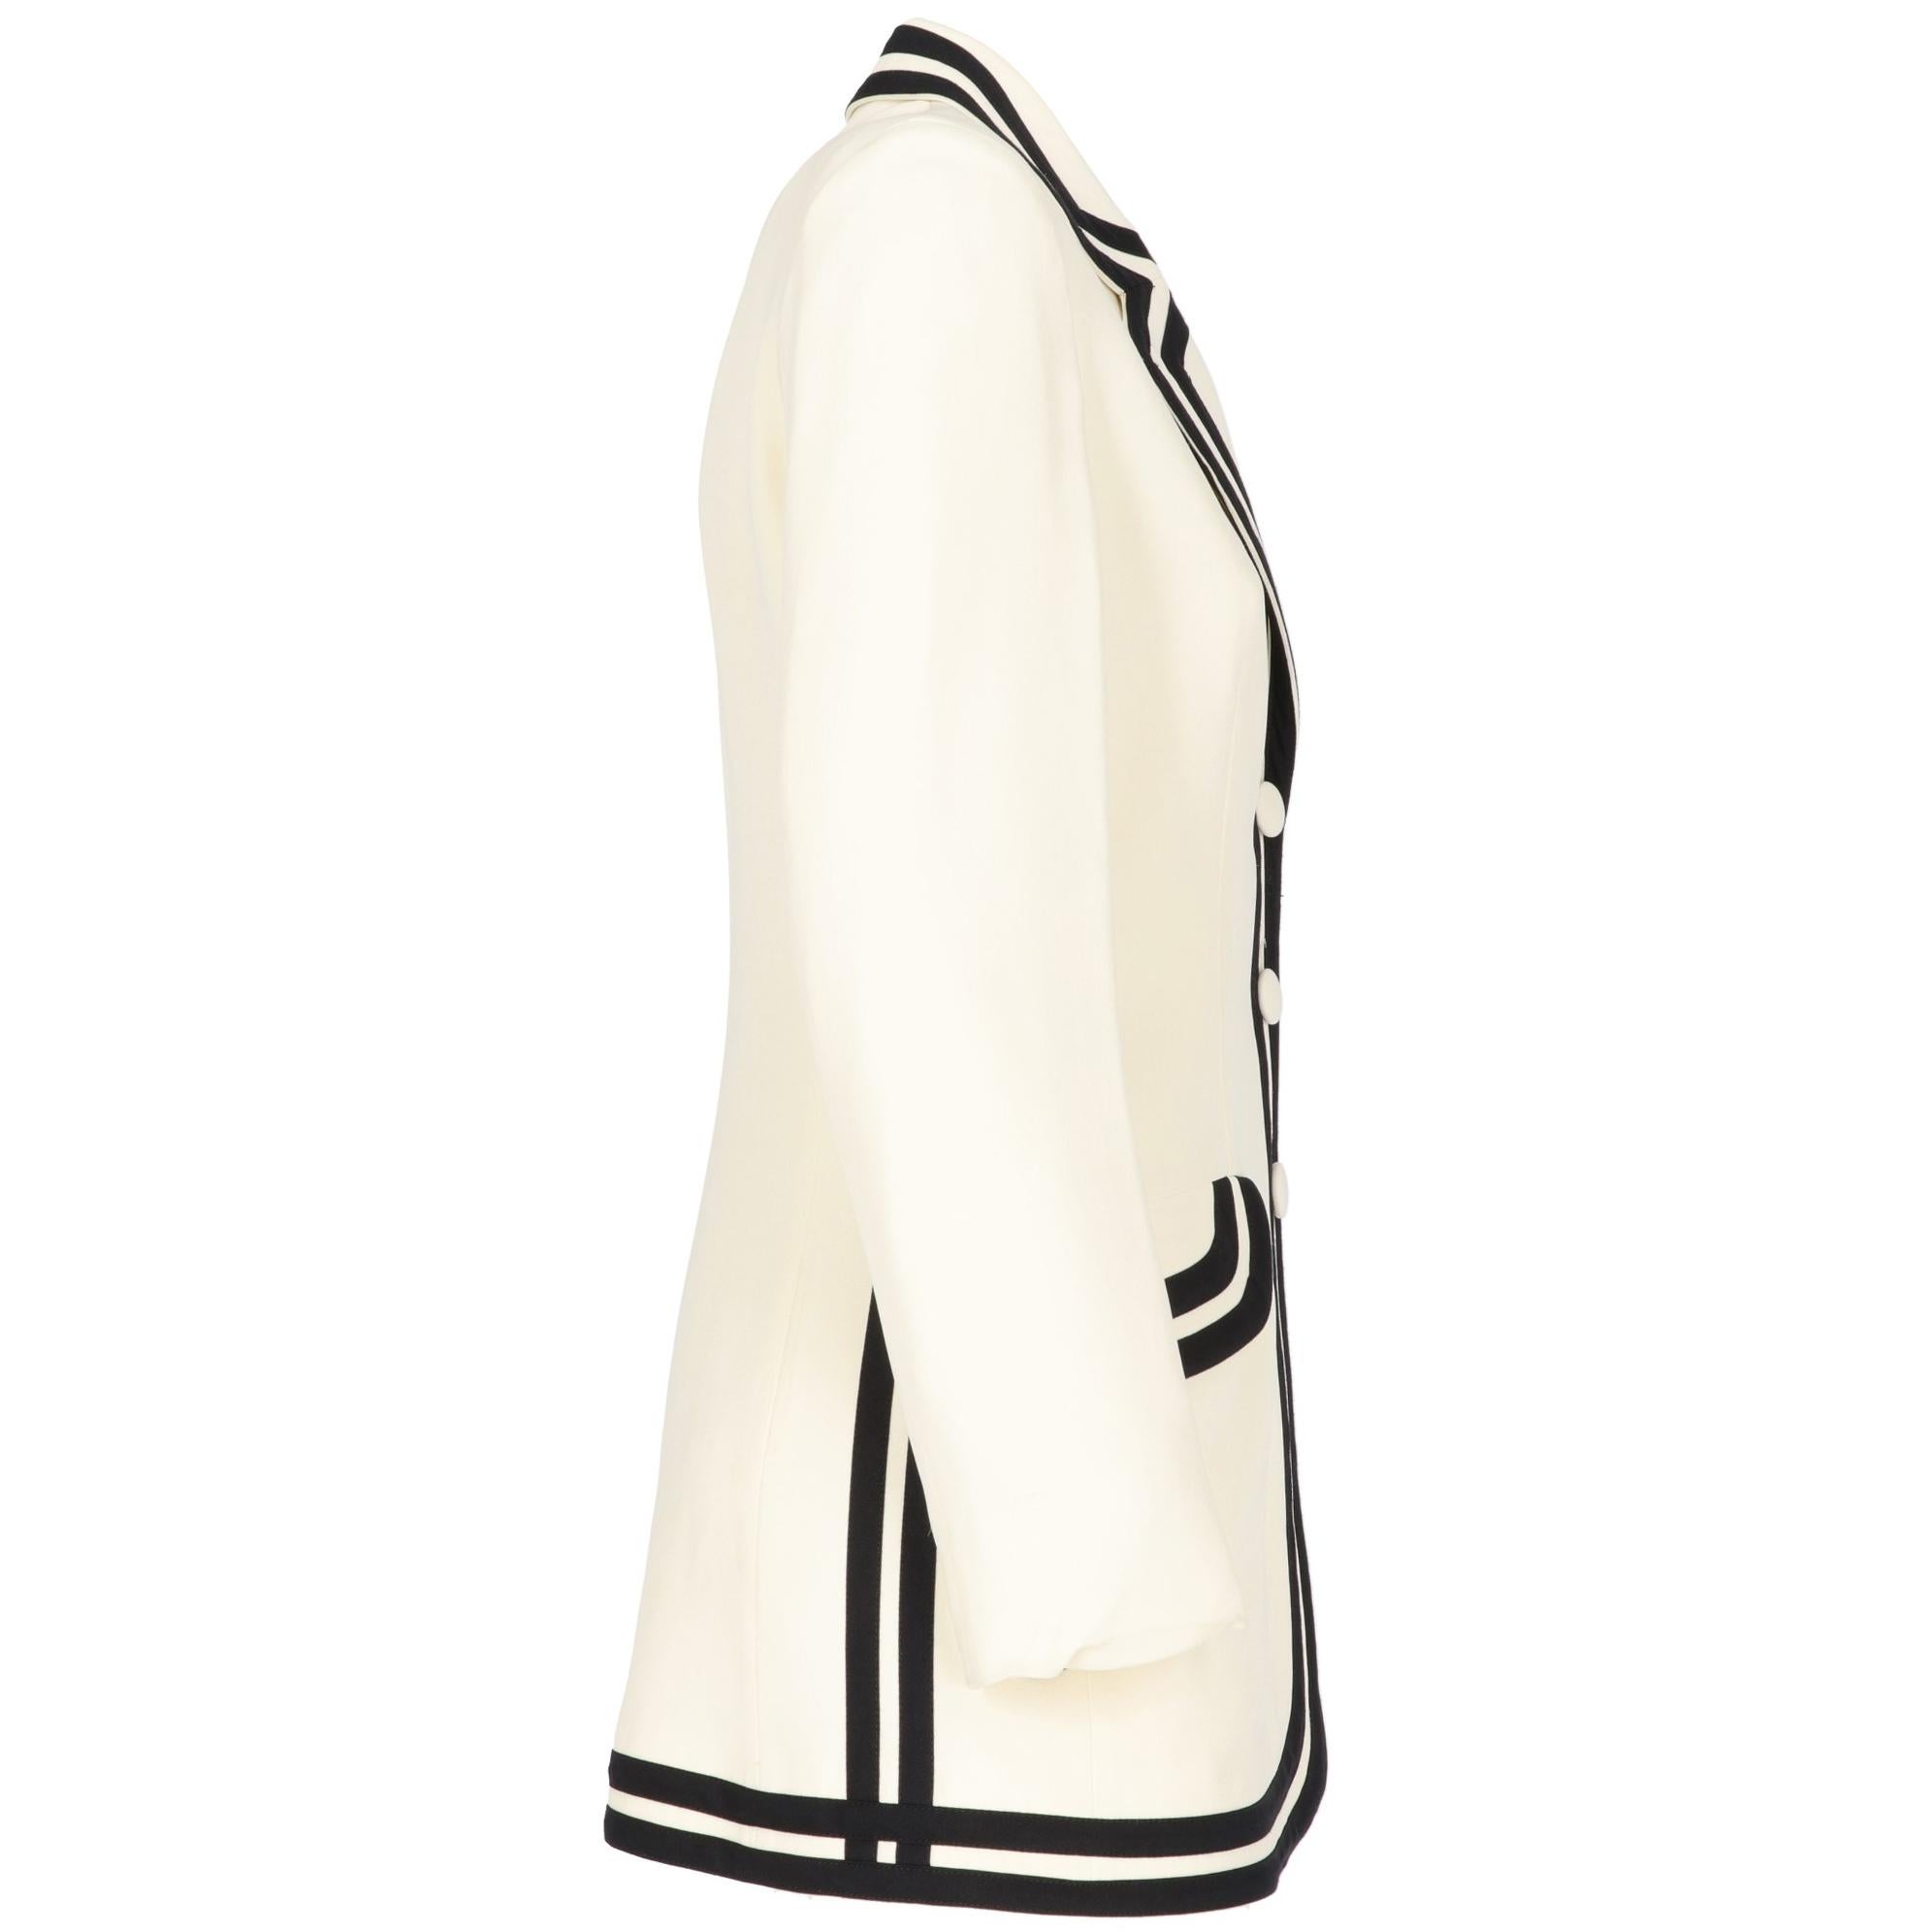 The elegant Cheap and Chic by Moschino ivory female blazer jackets features black decorative edges and inserts. With front buttoned fastening and a classic collar, the jackets features two front pockets with flaps and a soft lining. 
The jacket